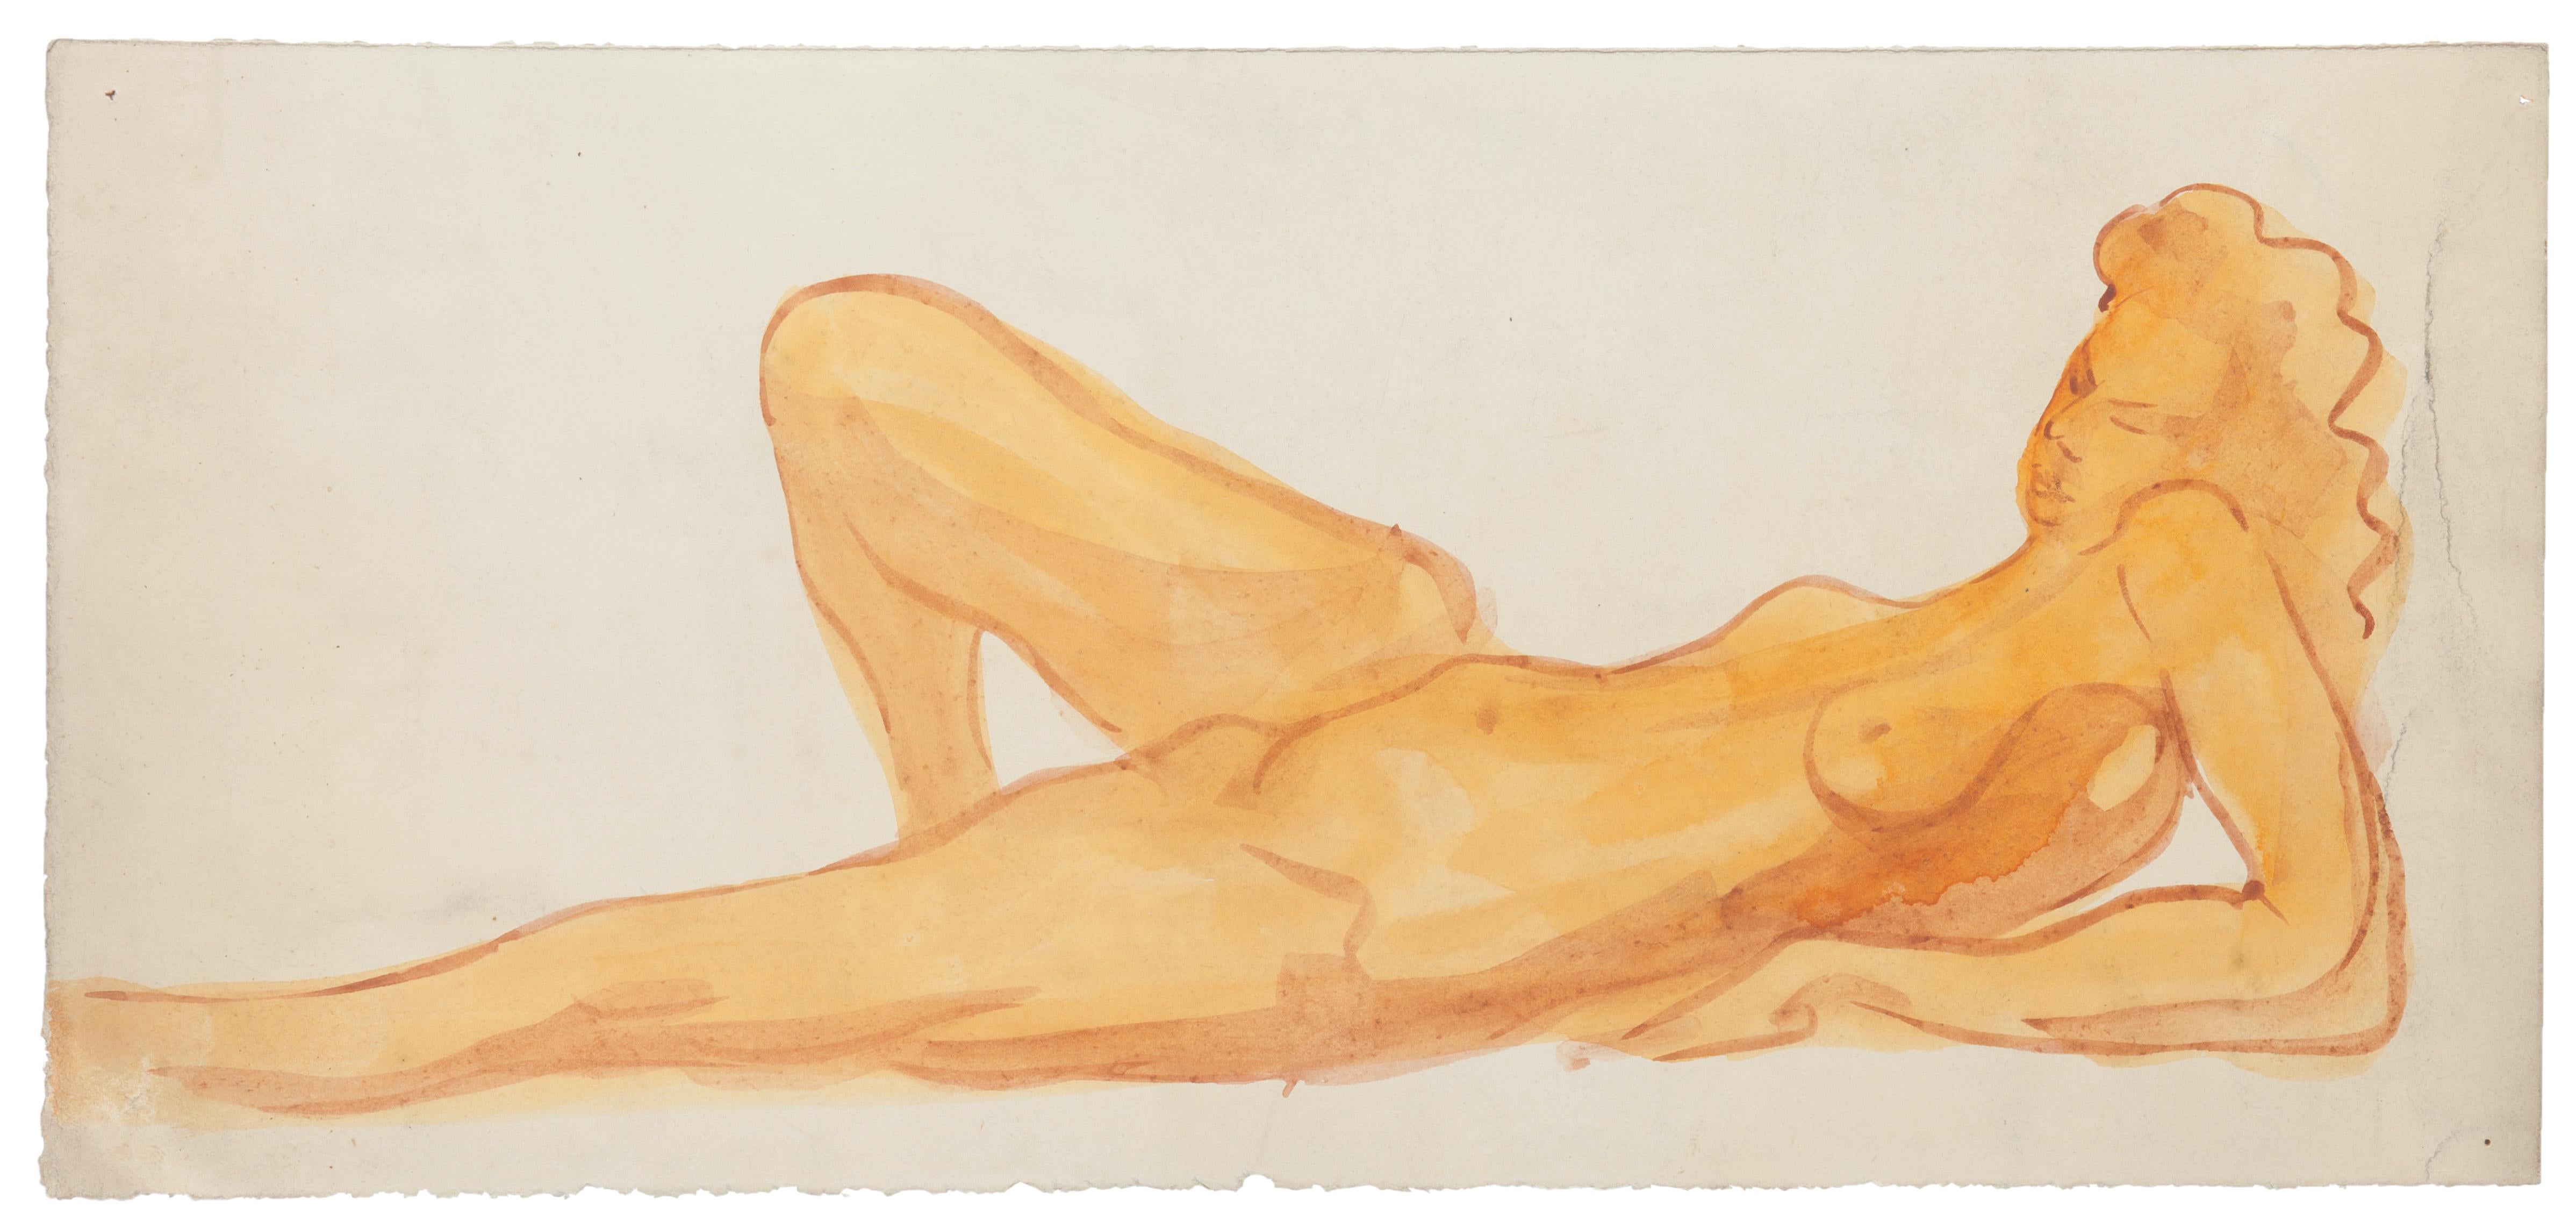 Nude 1935's is an original drawing in watercolor a on paper, realized by Jean Delpech (1988-1916). 

Sheet dimension: 13.1 x 29.5 cm.

The artwork represents a nude woman lying down, skillfully created, through delicate lines and vivid